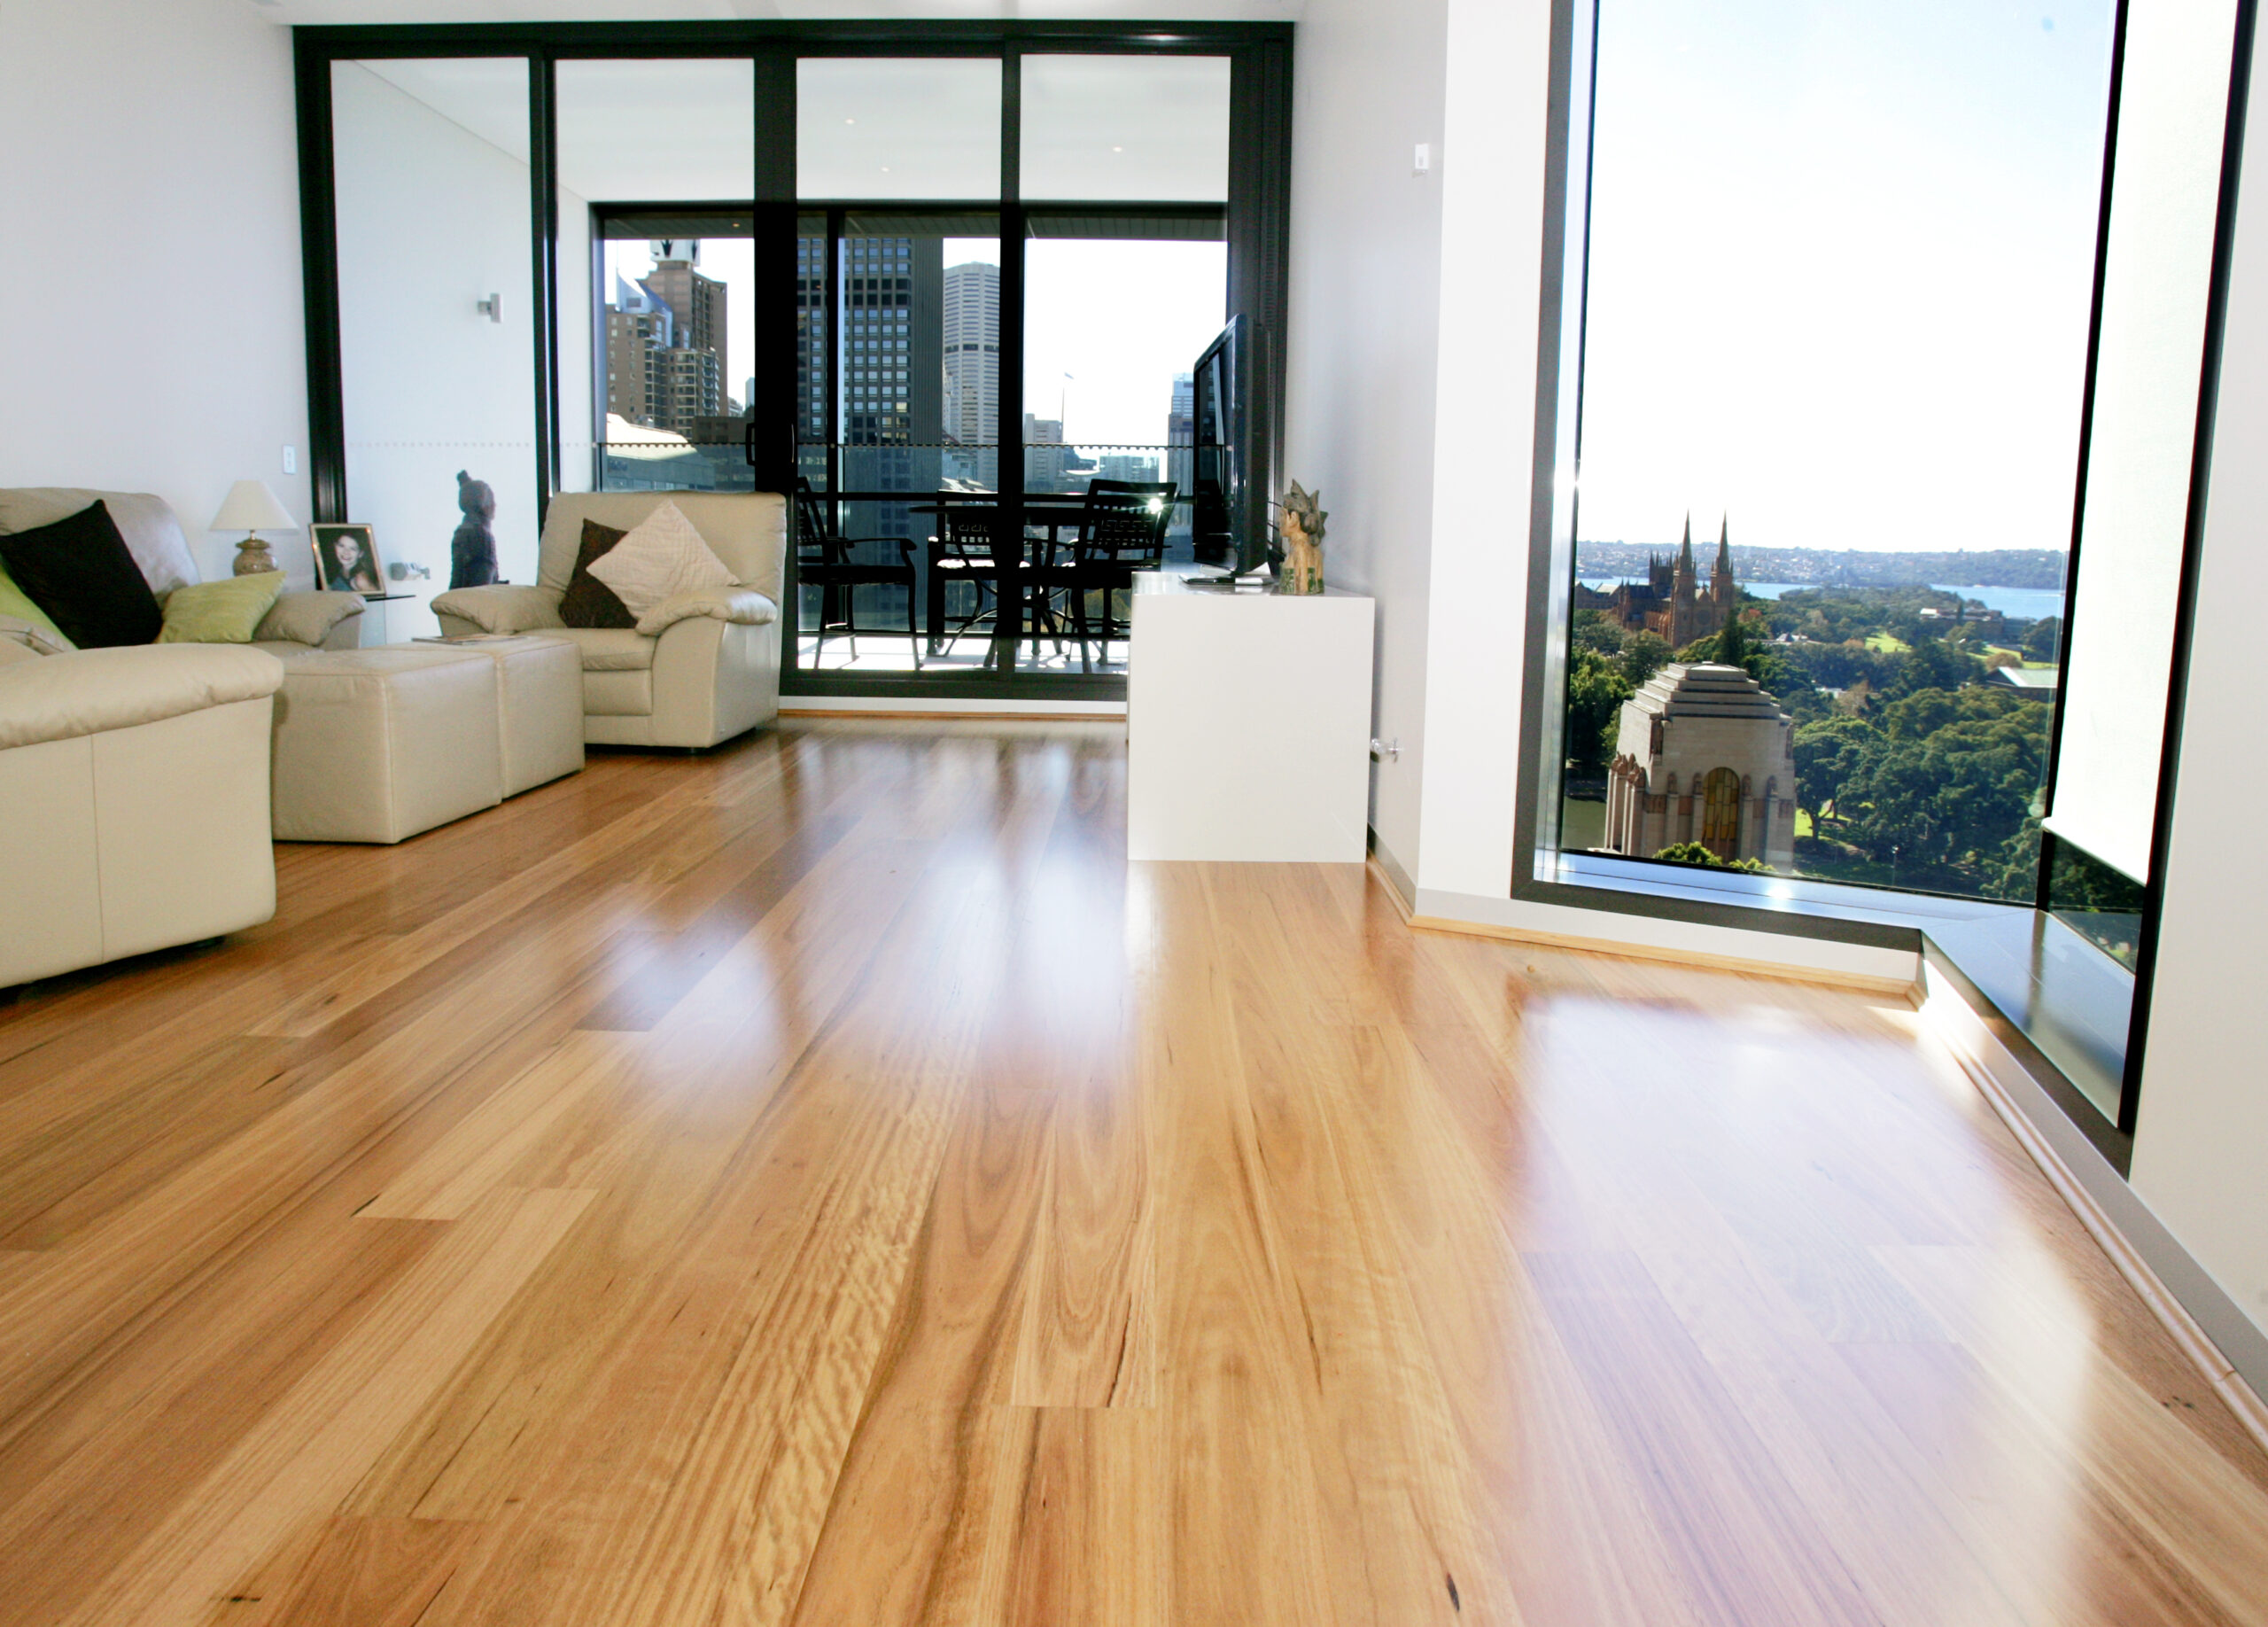 Why Choose Dark Wood Floors For Your Home?